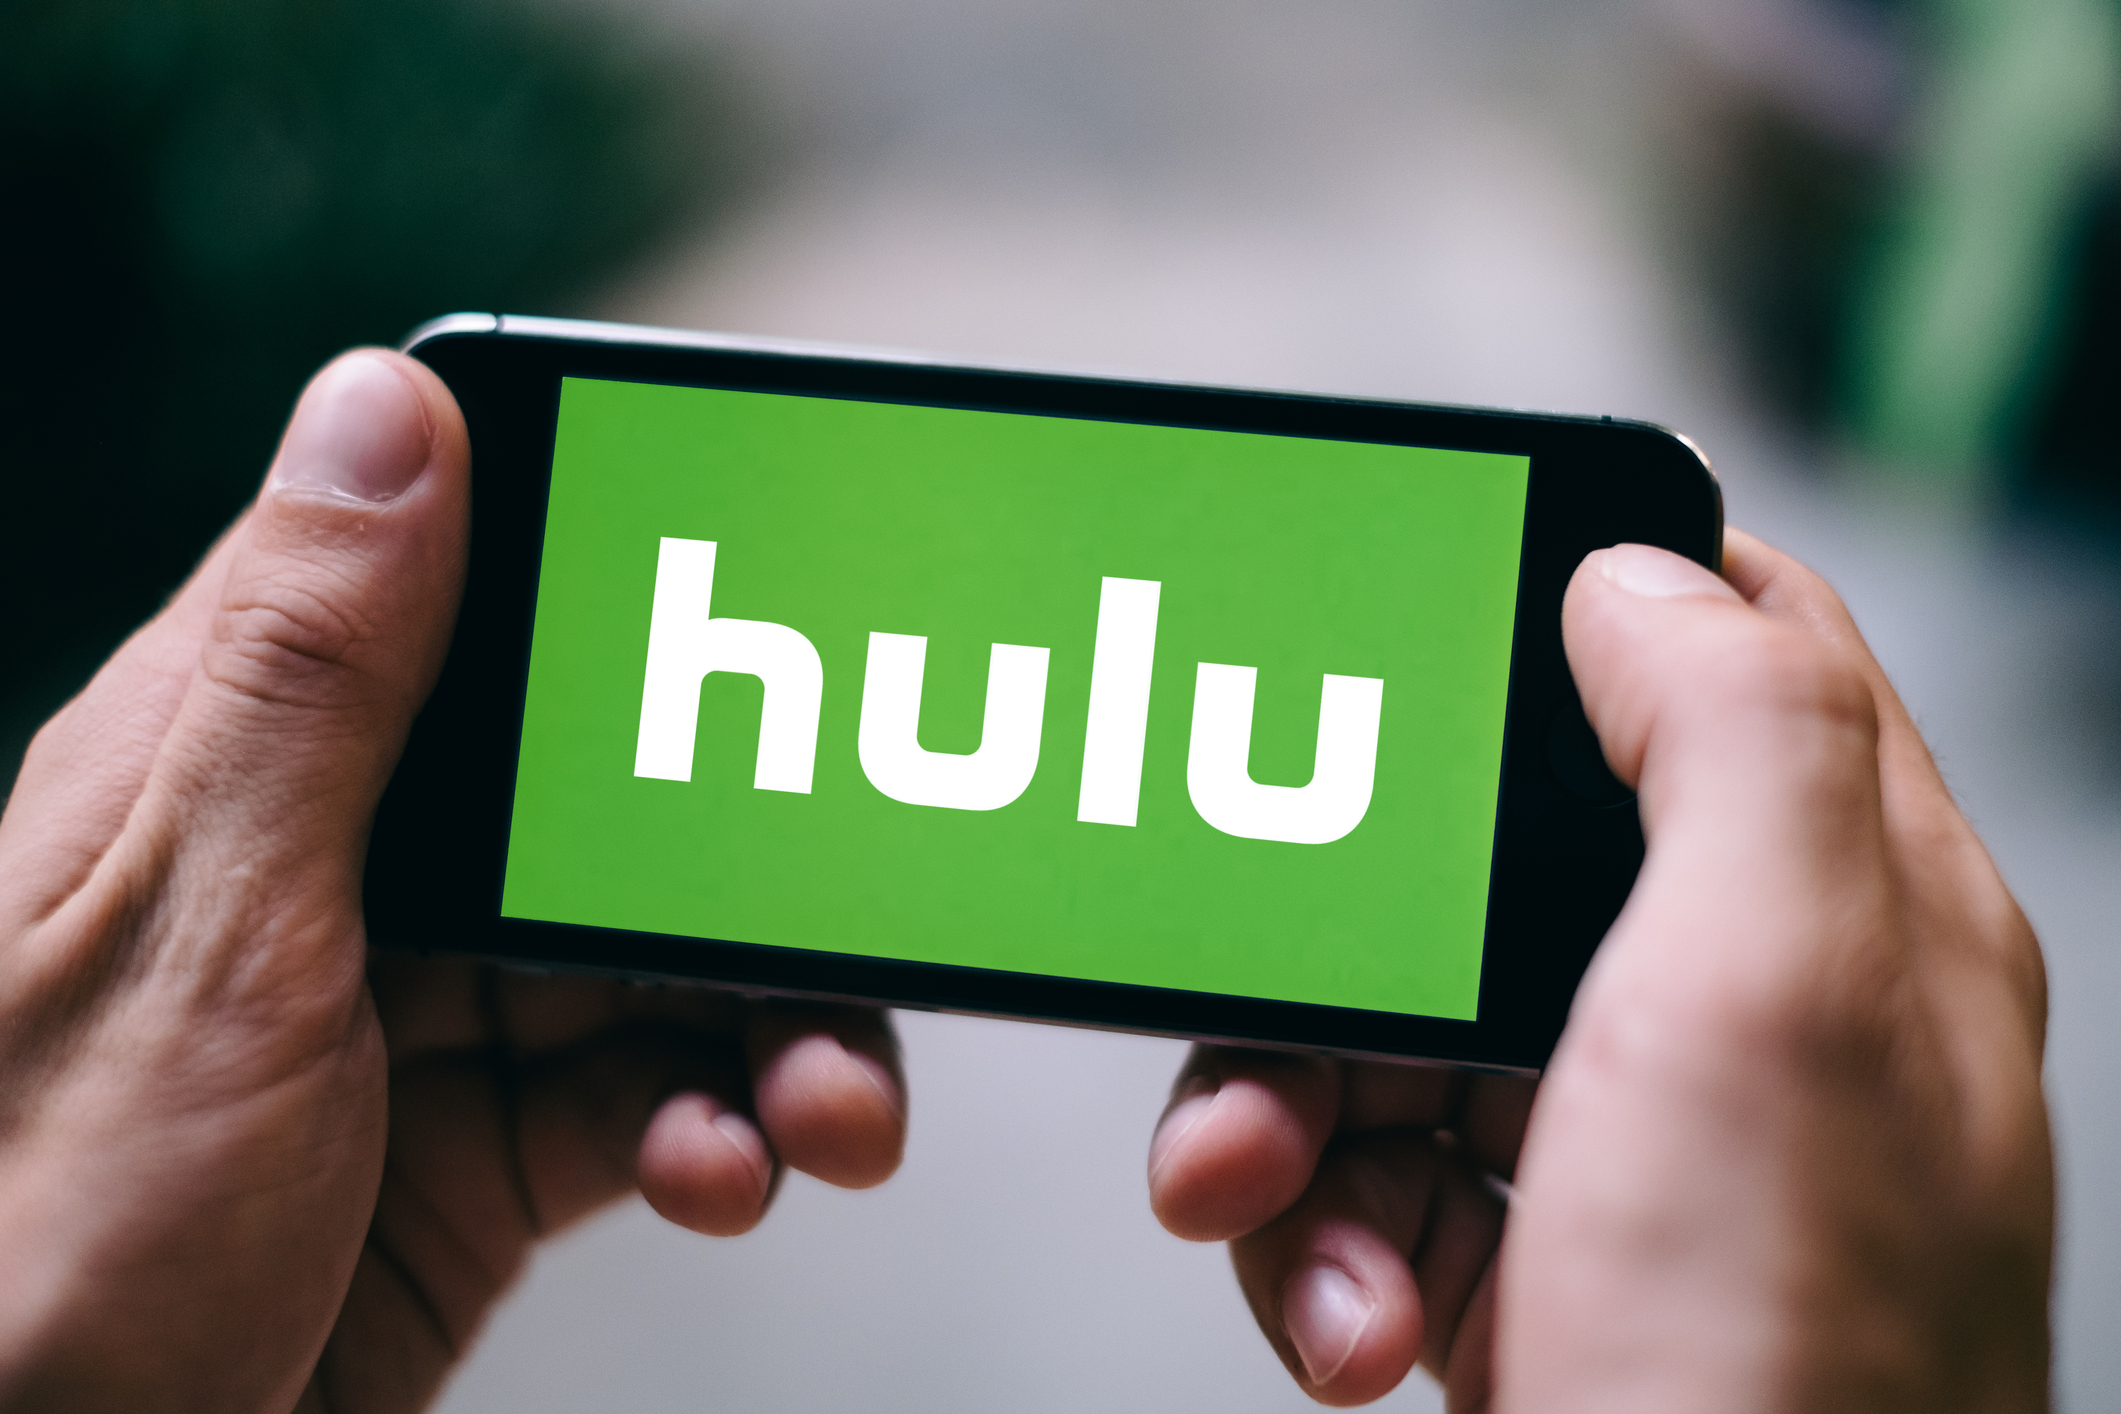 Hulu Black Friday sale: Pay $1.99 per month for 1 year